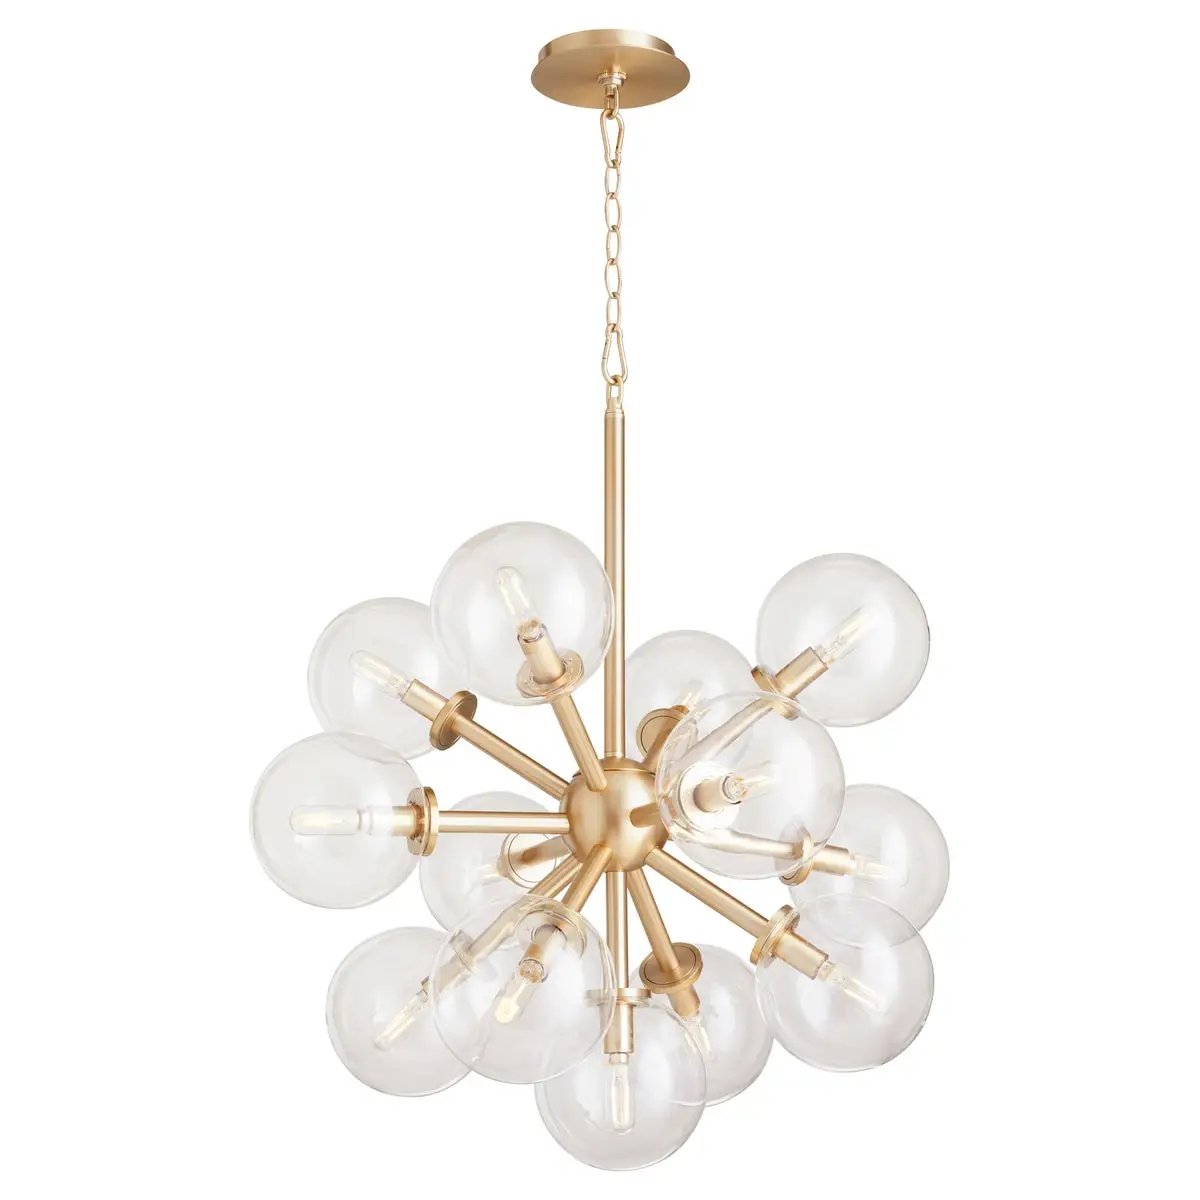 Sputnik chandelier with clear glass domes and aged brass frames, adding mid-century modern appeal. 13 bulbs, 60W, dimmable. UL Listed. 26&quot;W x 22&quot;H.